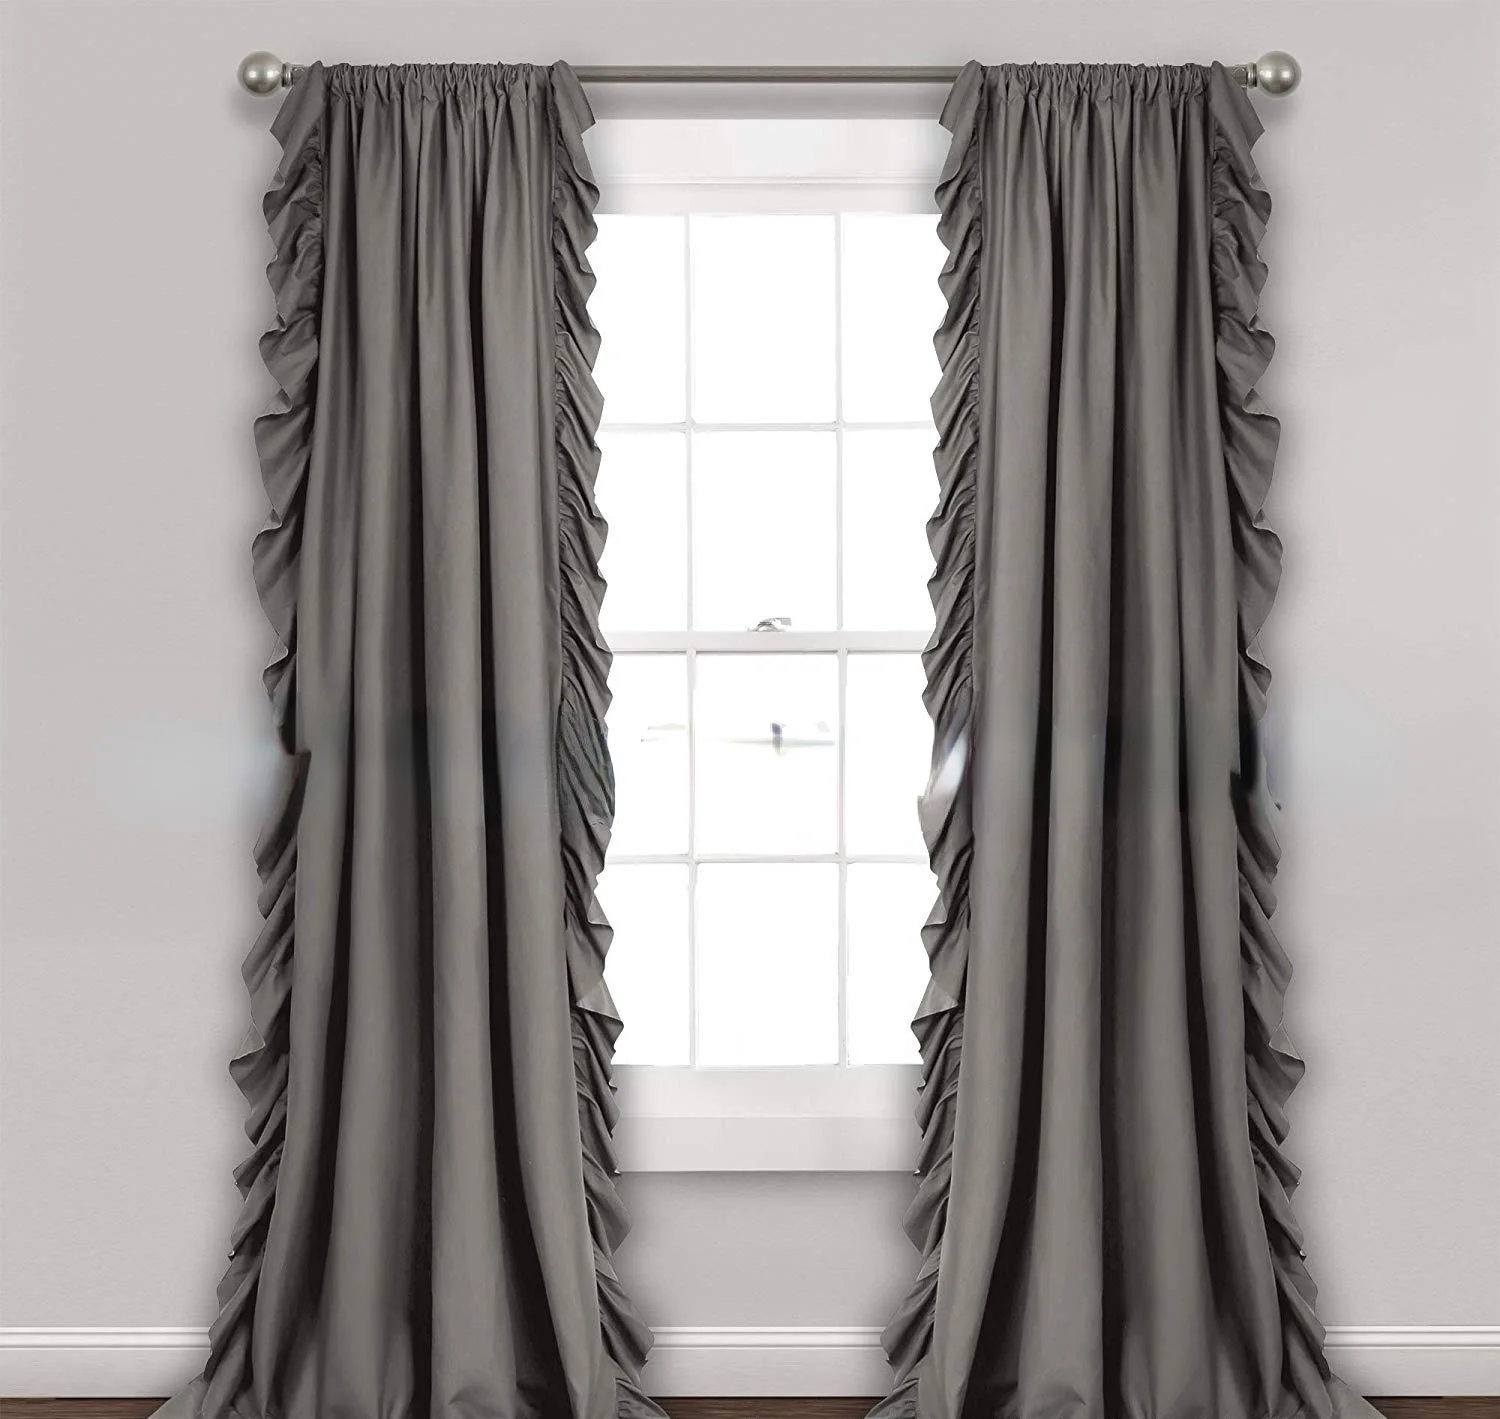 Luxury 2022 American Nordic Ruffle Solid Color Blackout Curtain Customized Sheer on Sale Bohemian Wedding Decoration